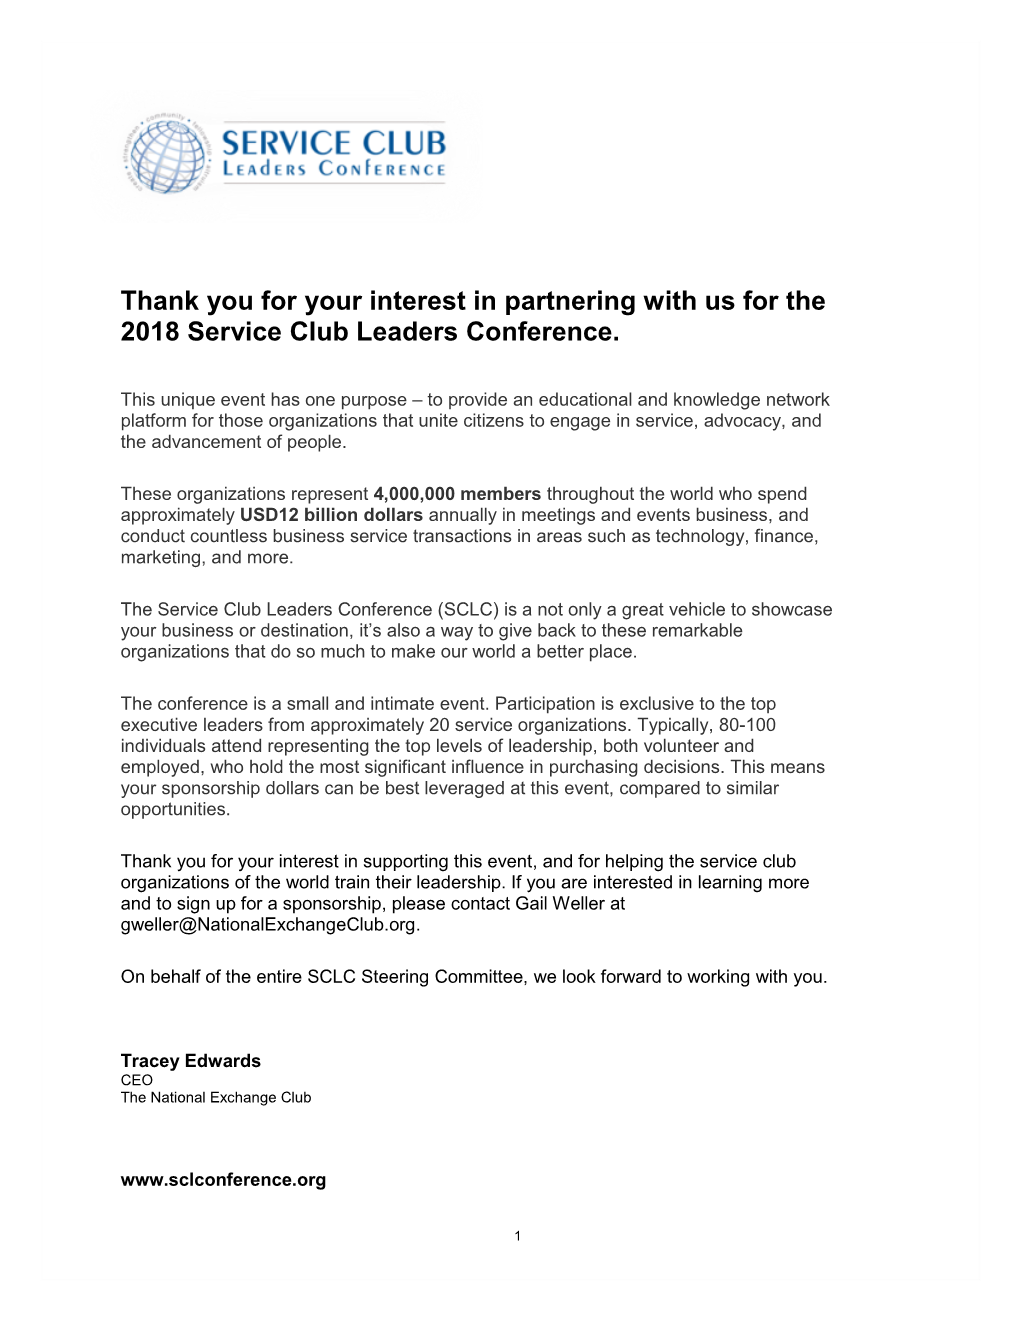 Thank You for Your Interest in Partnering with Us for the 2018 Service Club Leaders Conference